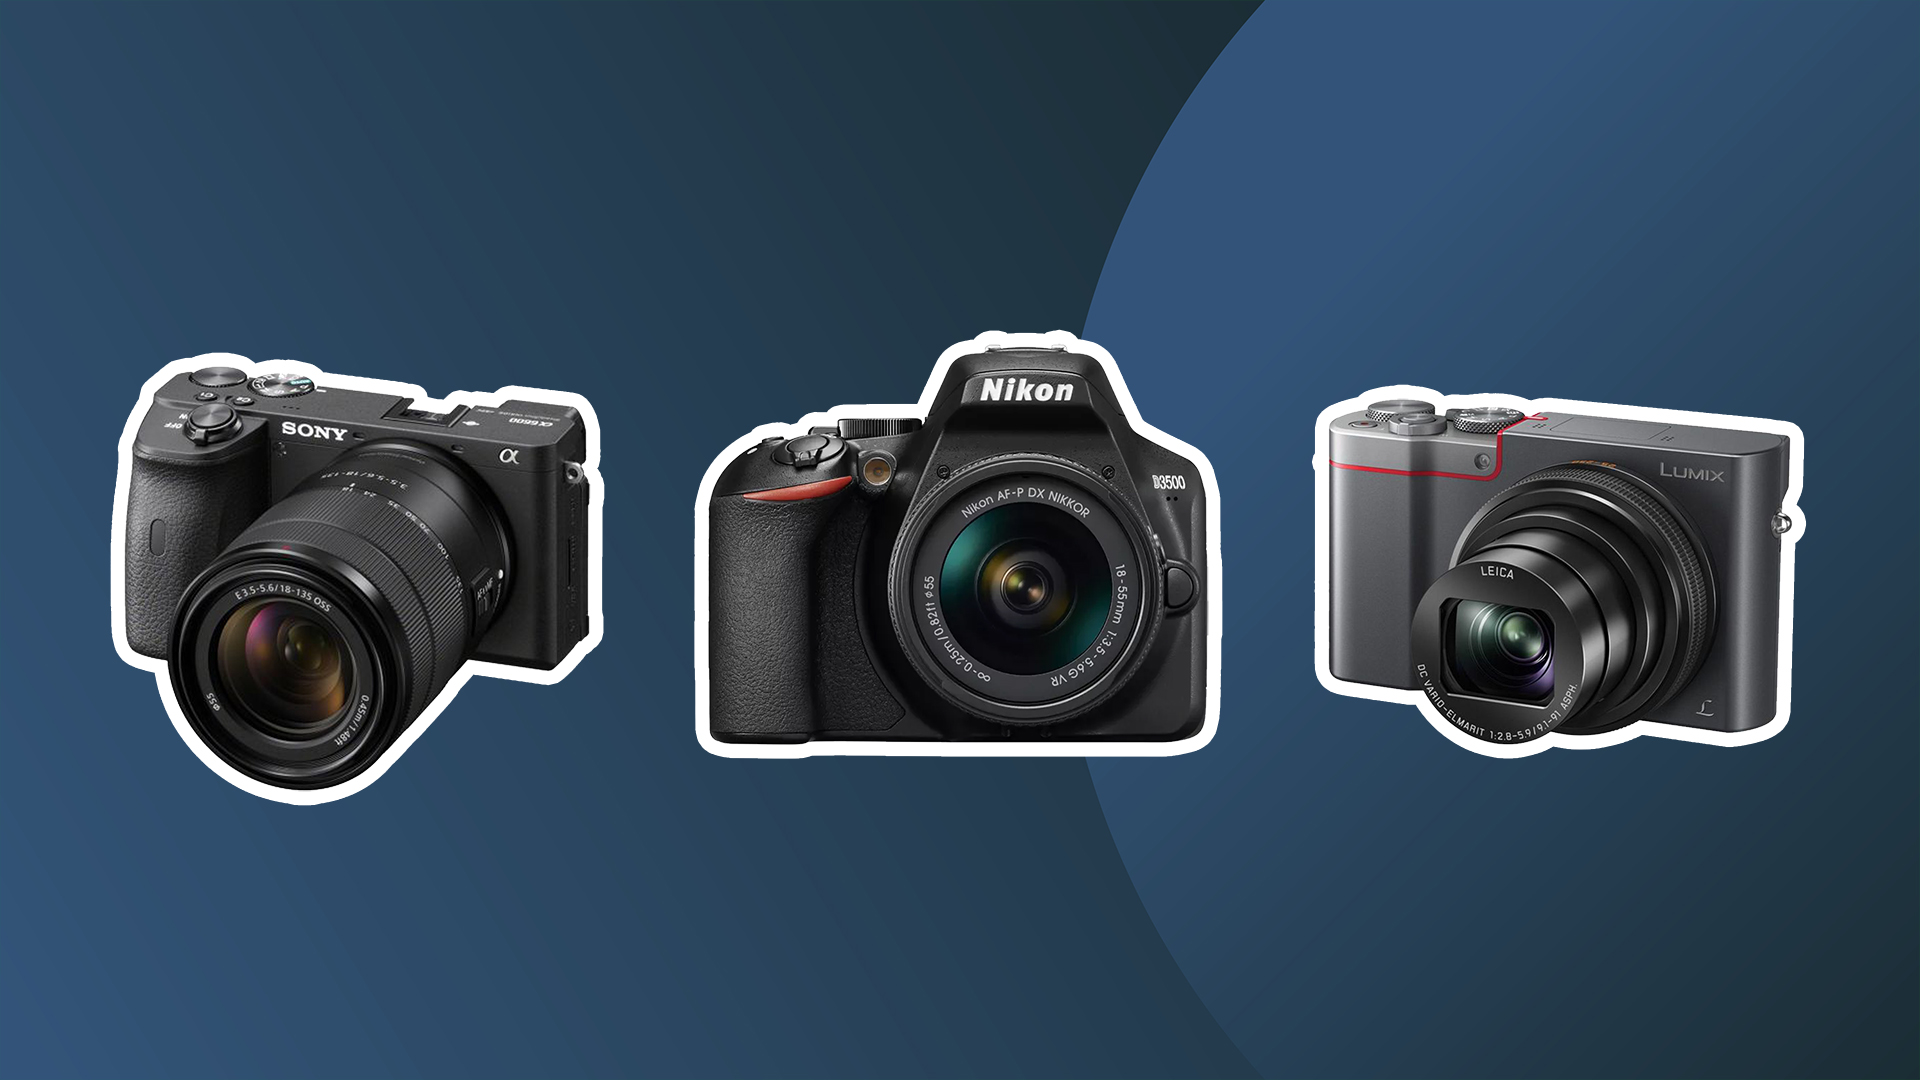 The best camera for beginners in 2024